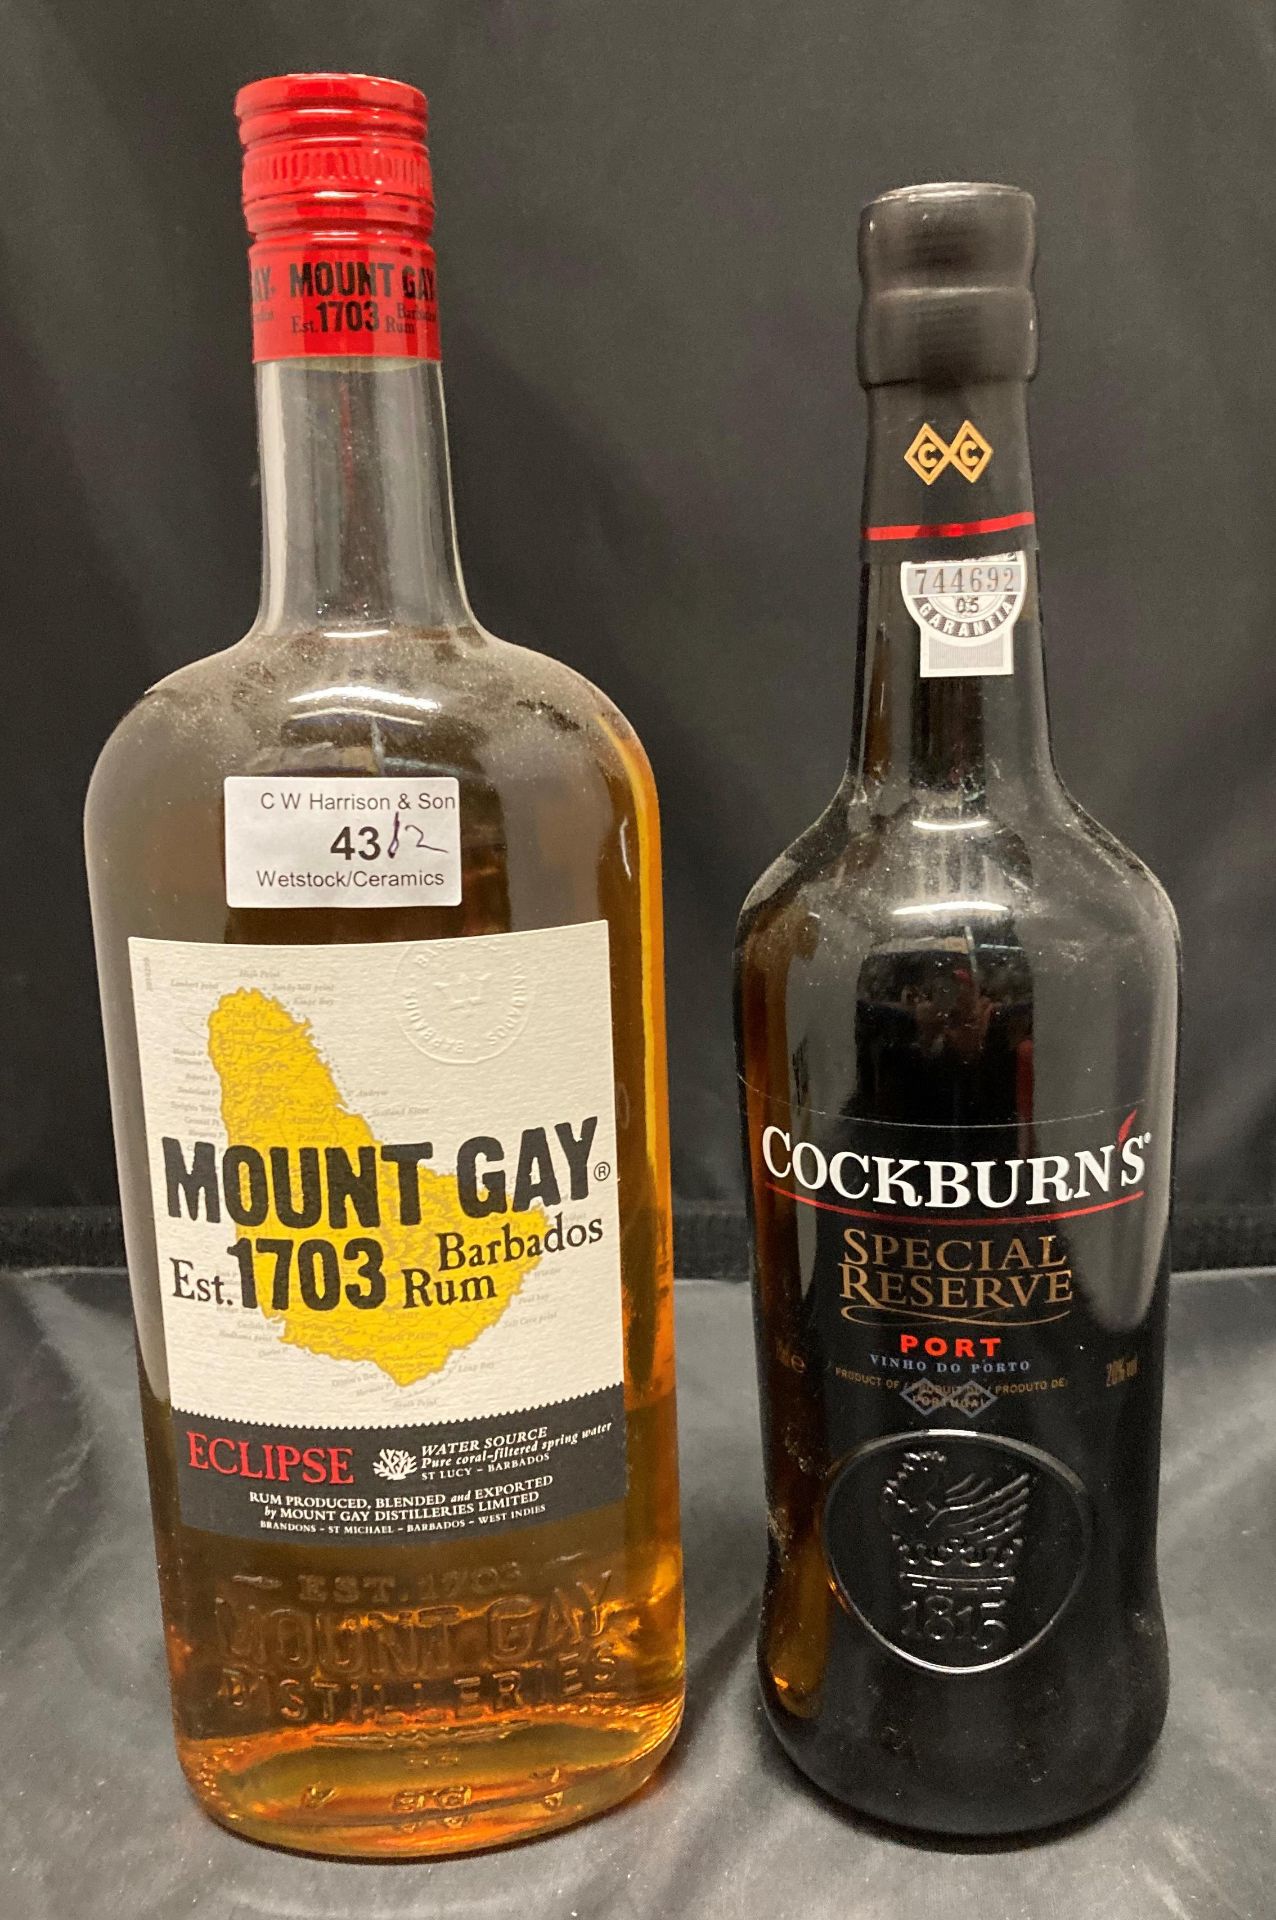 A one litre bottle of Eclipse Mount Gay Barbados Rum 40% volume and a 75cl bottle of Cockburn's